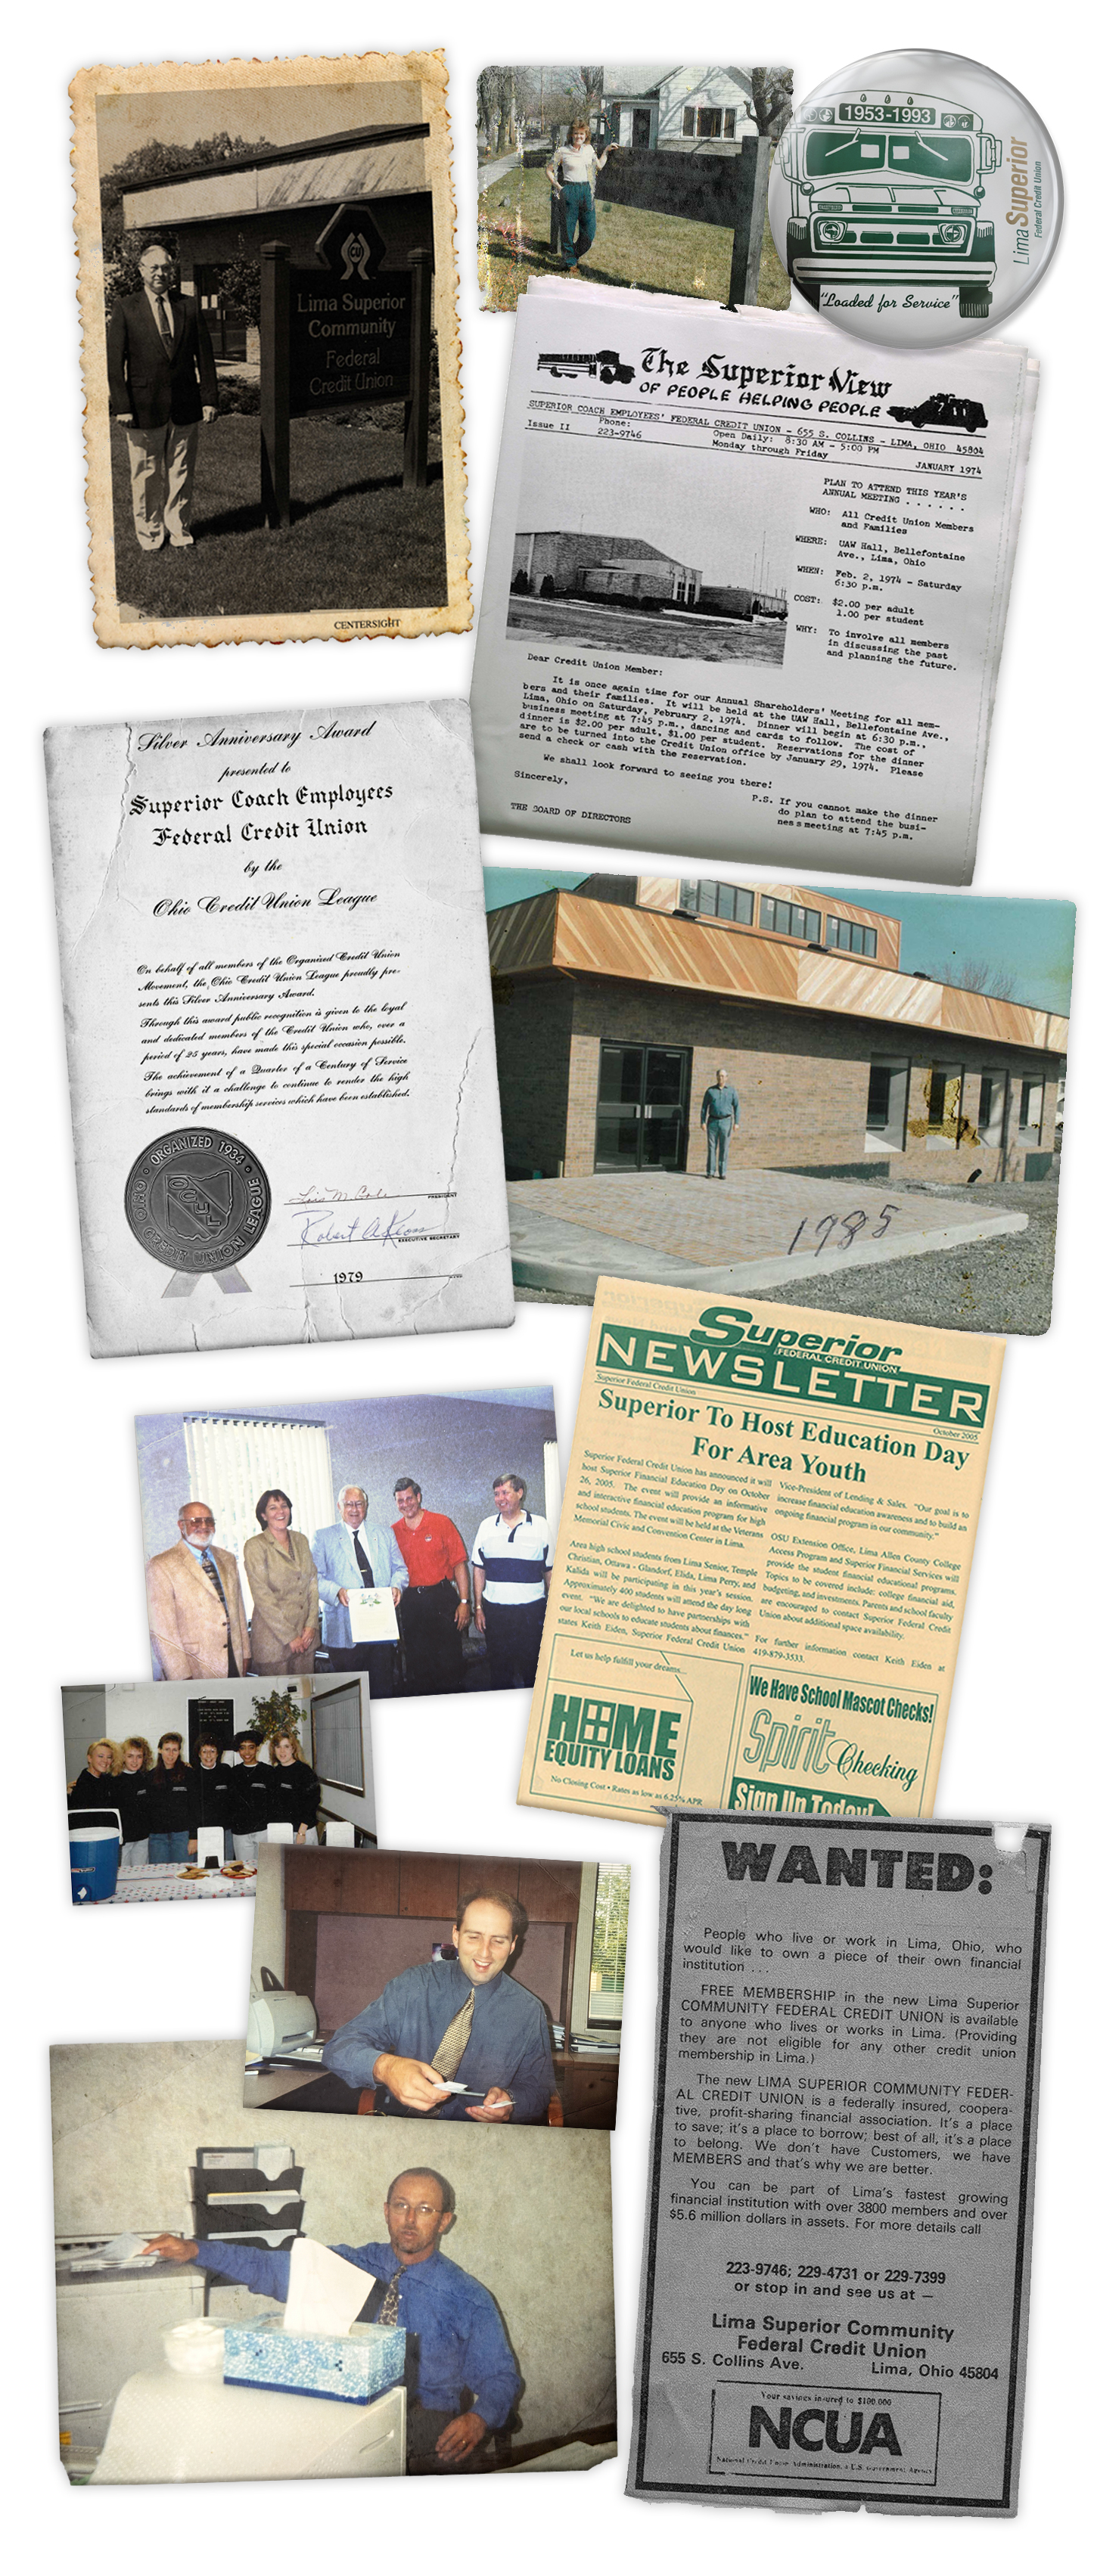 Several Images showing different moments in Superior Credit Union History